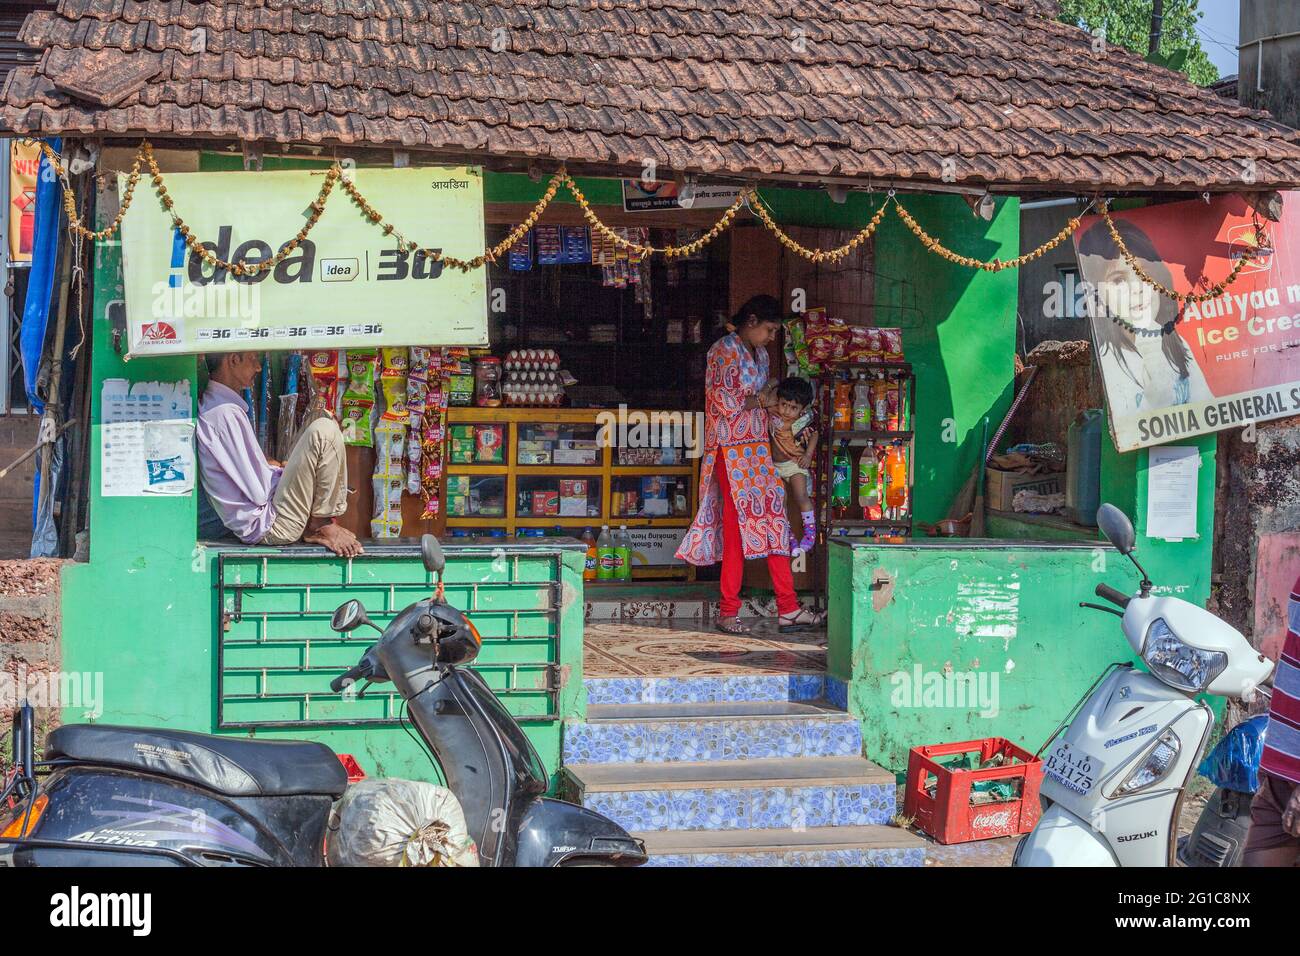 Indian female wearing ethnic salwar kameez shopping for conveniences at the local Sonia General Store, Agonda, Goa, India Stock Photo